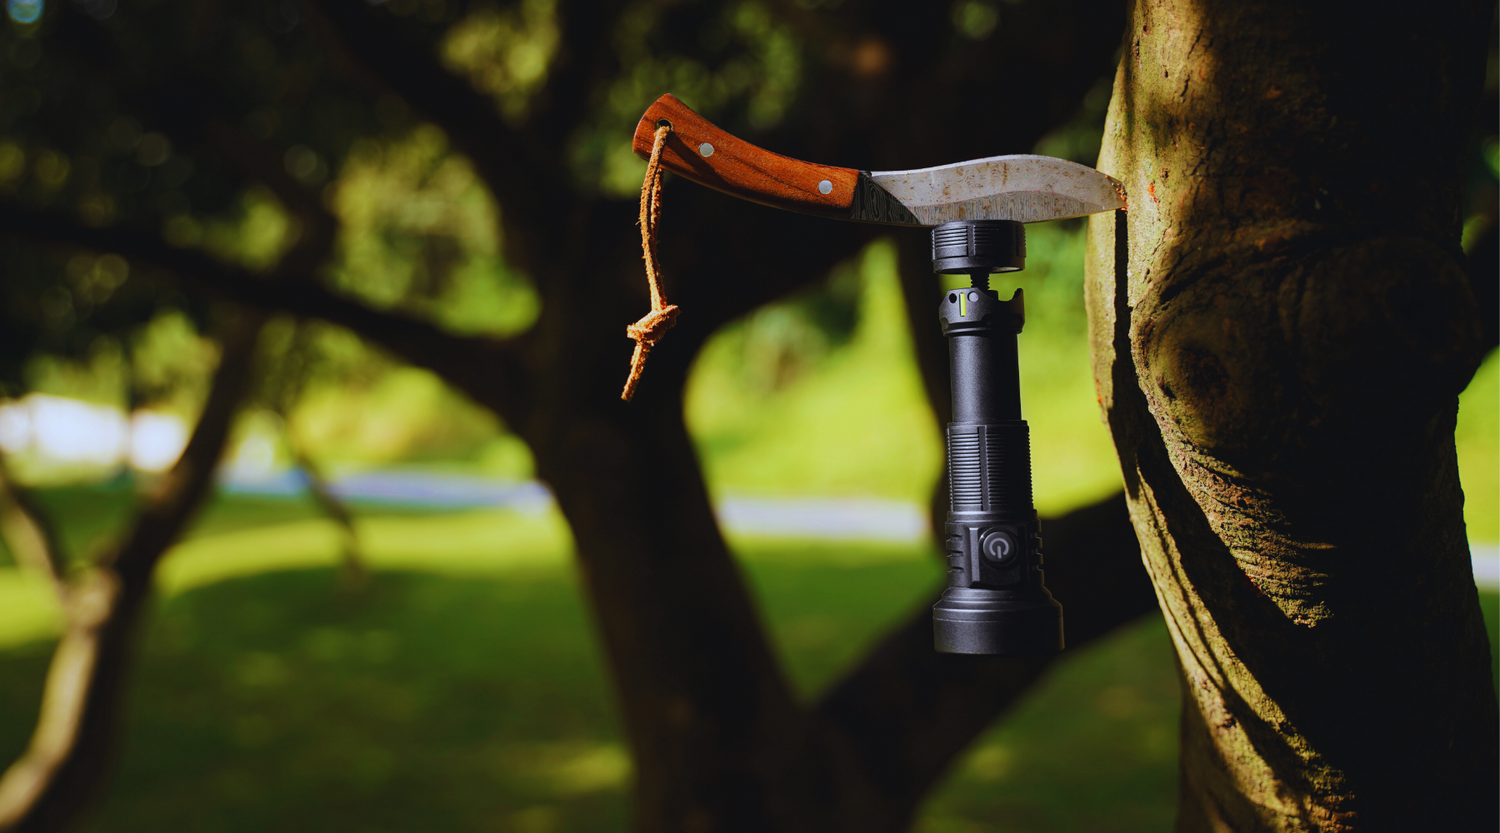 urFlamp V63: The Brightest Retractable Flashlight in Your Pocket